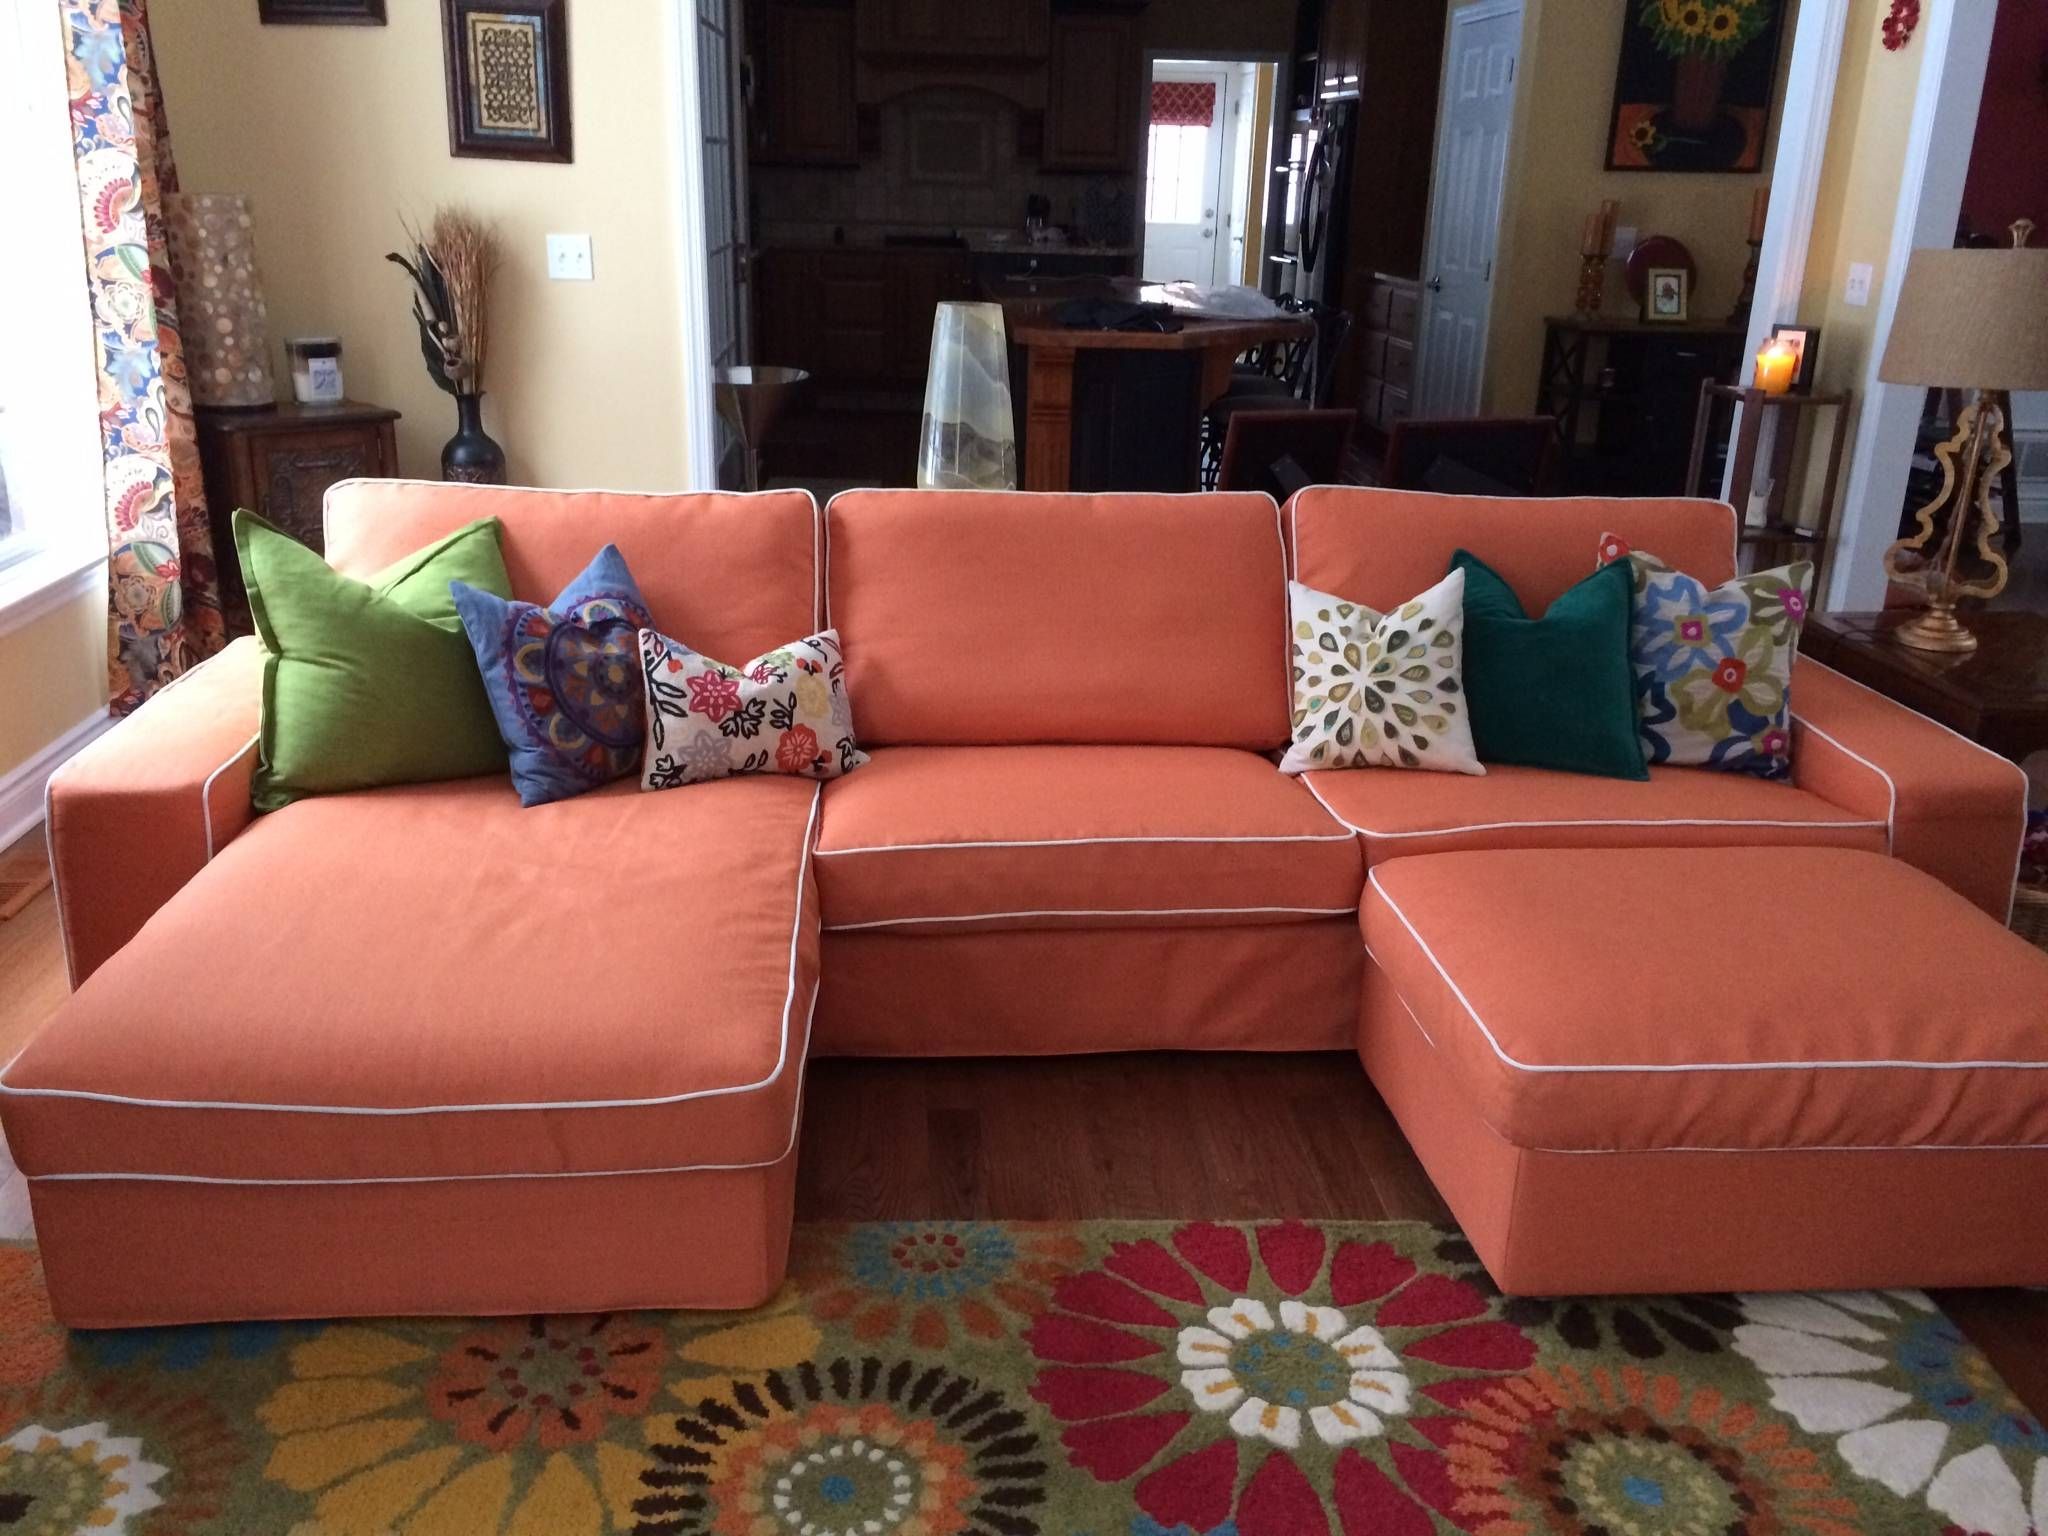 Living Room Sectional Couch Slip Cover L Couch Slipcovers L With 3 Piece Sectional Sofa Slipcovers 